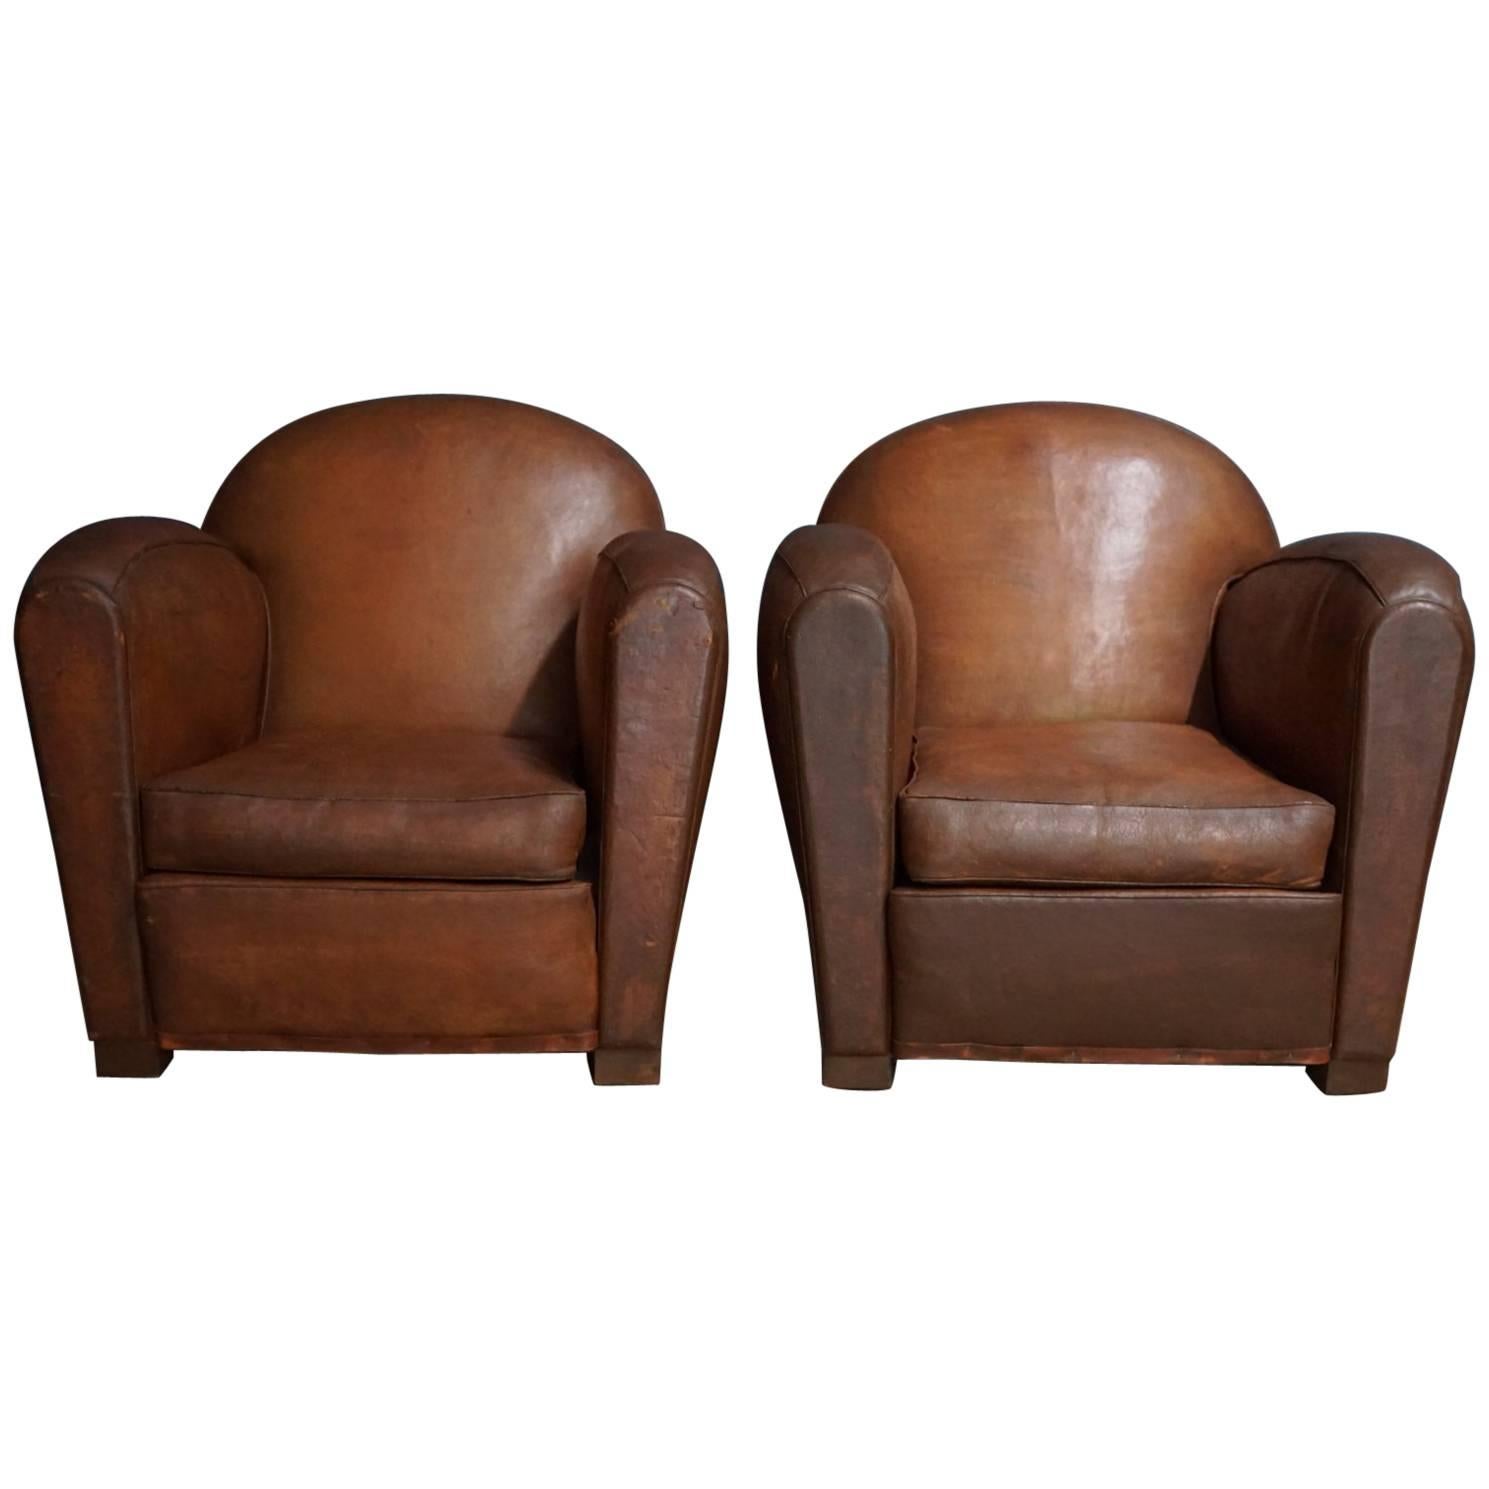 Vintage French Cognac Leather Club Chairs, Set of Two